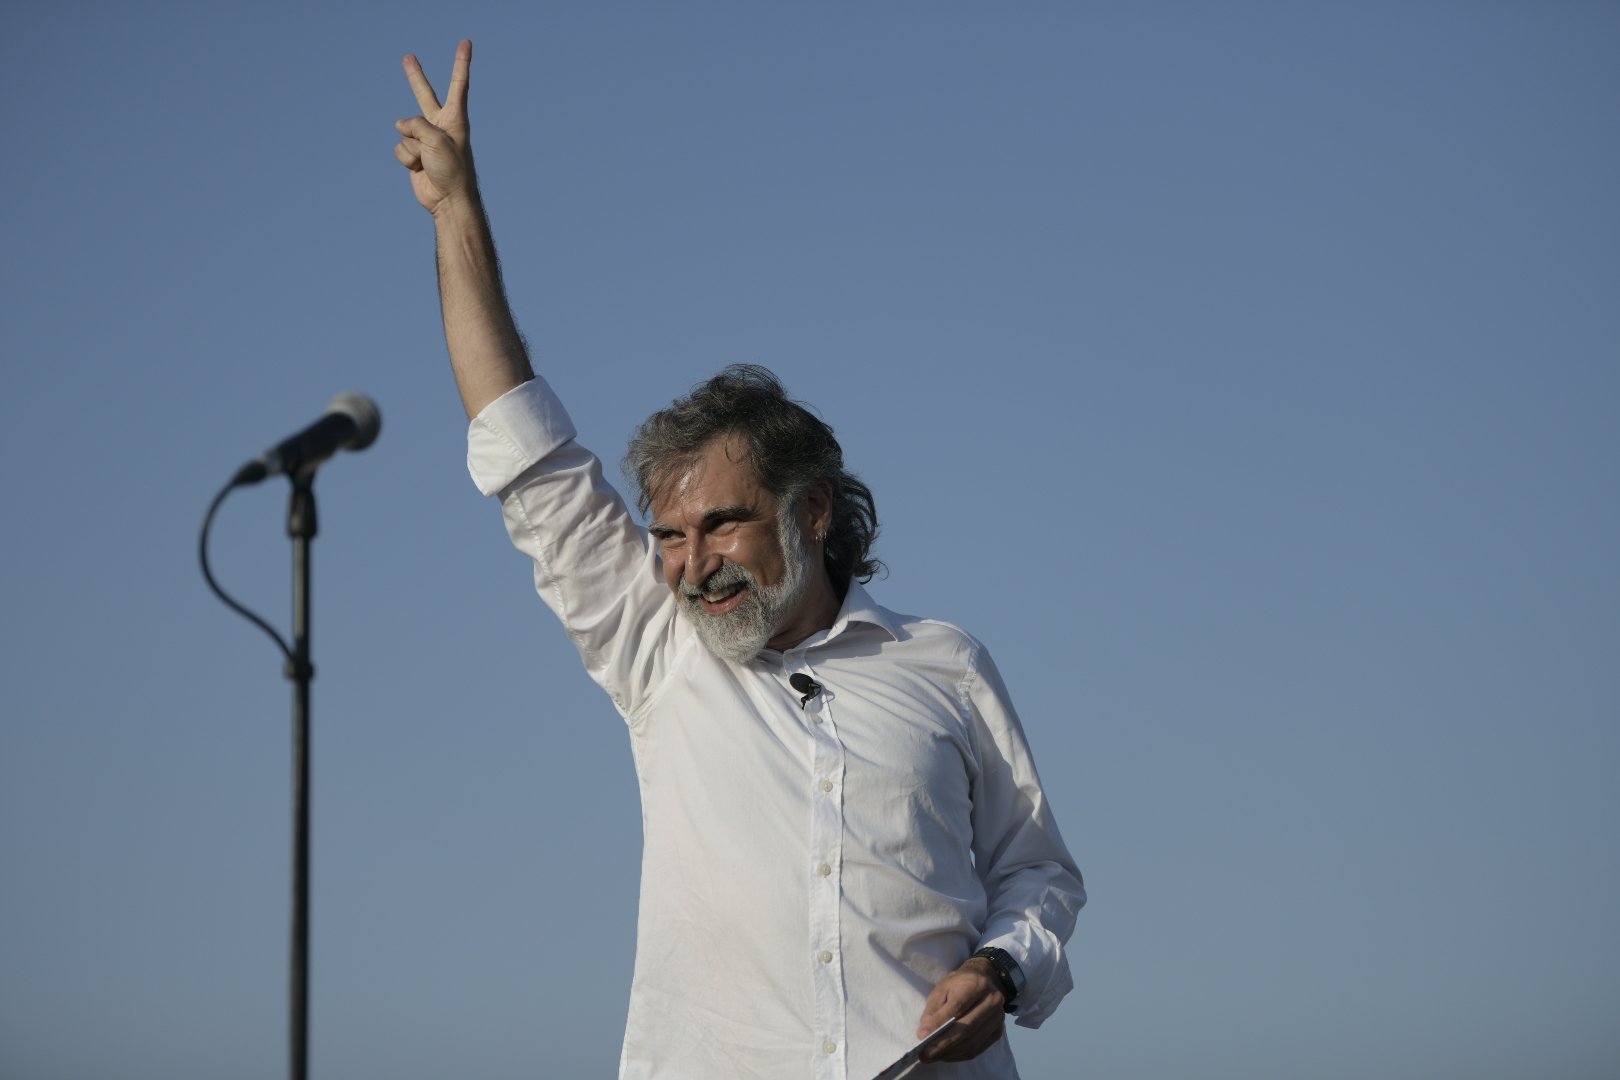 Jordi Cuixart: "The pardons don't end anything. The struggle continues, we persist."